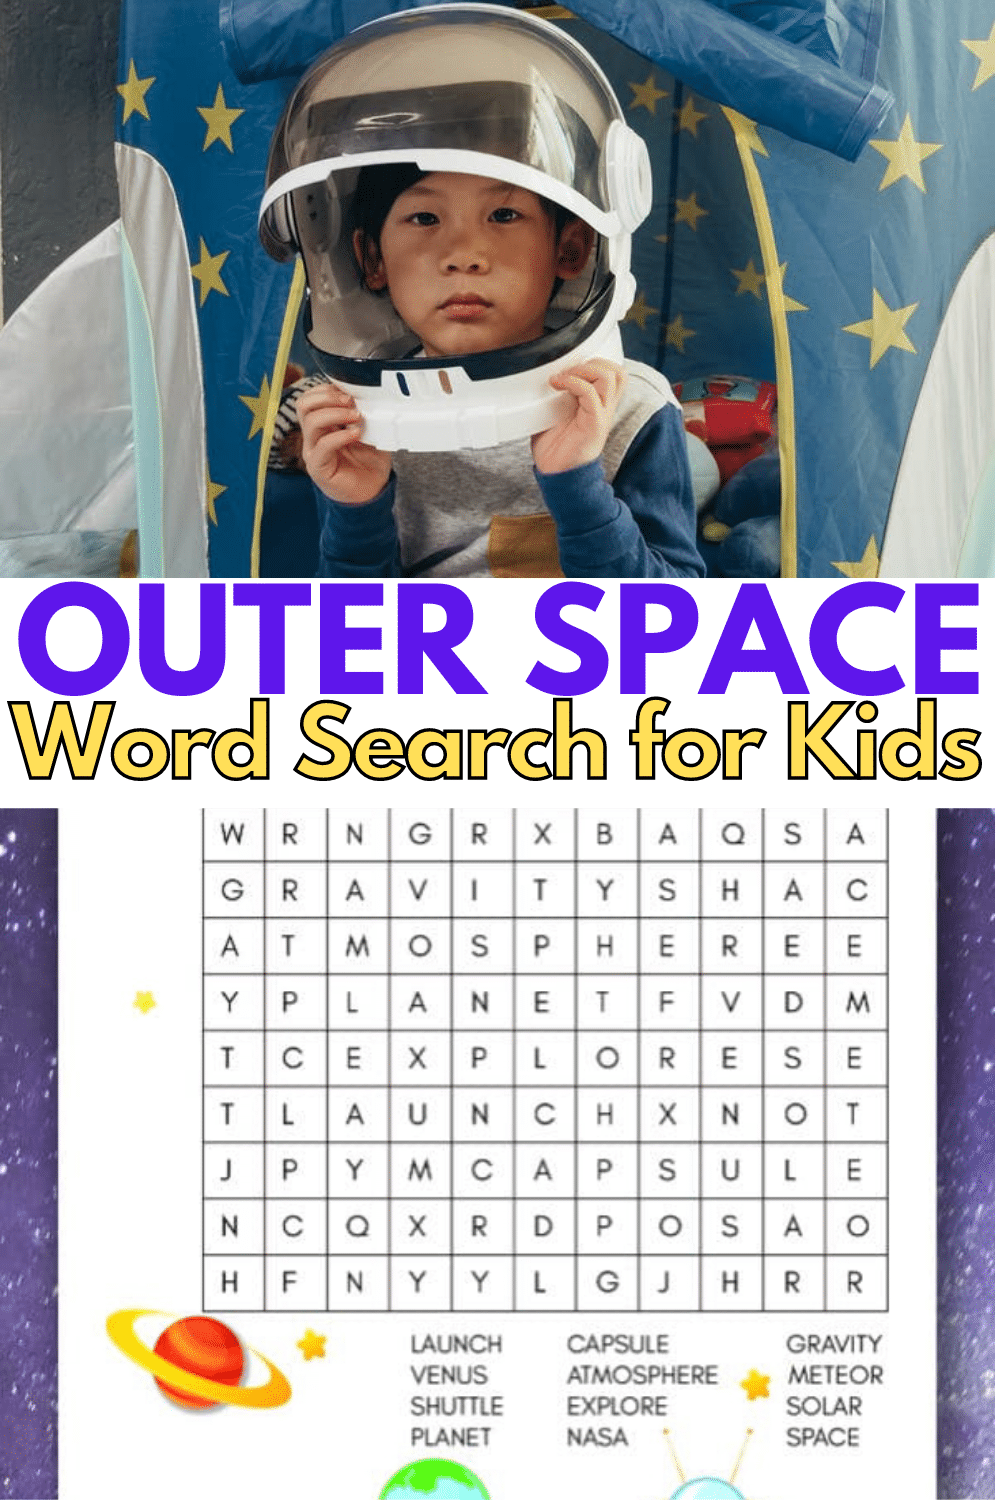 This printable outer space word search for kids is a fun and educational way for children to learn words about space and our galaxy. #outerspace #wordsearch #printables via @wondermomwannab